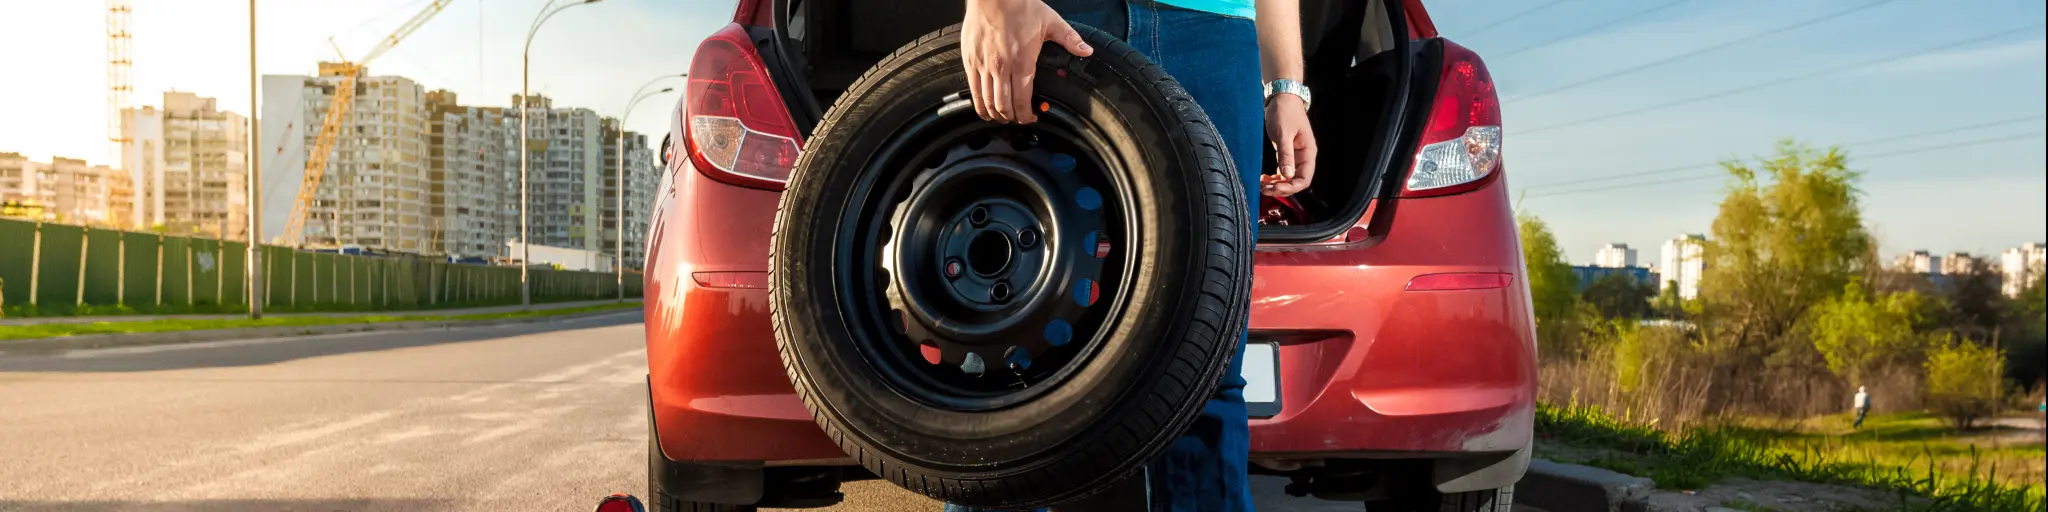 Man suffered a puncture and needs to know how fast can you drive on a spare tire.